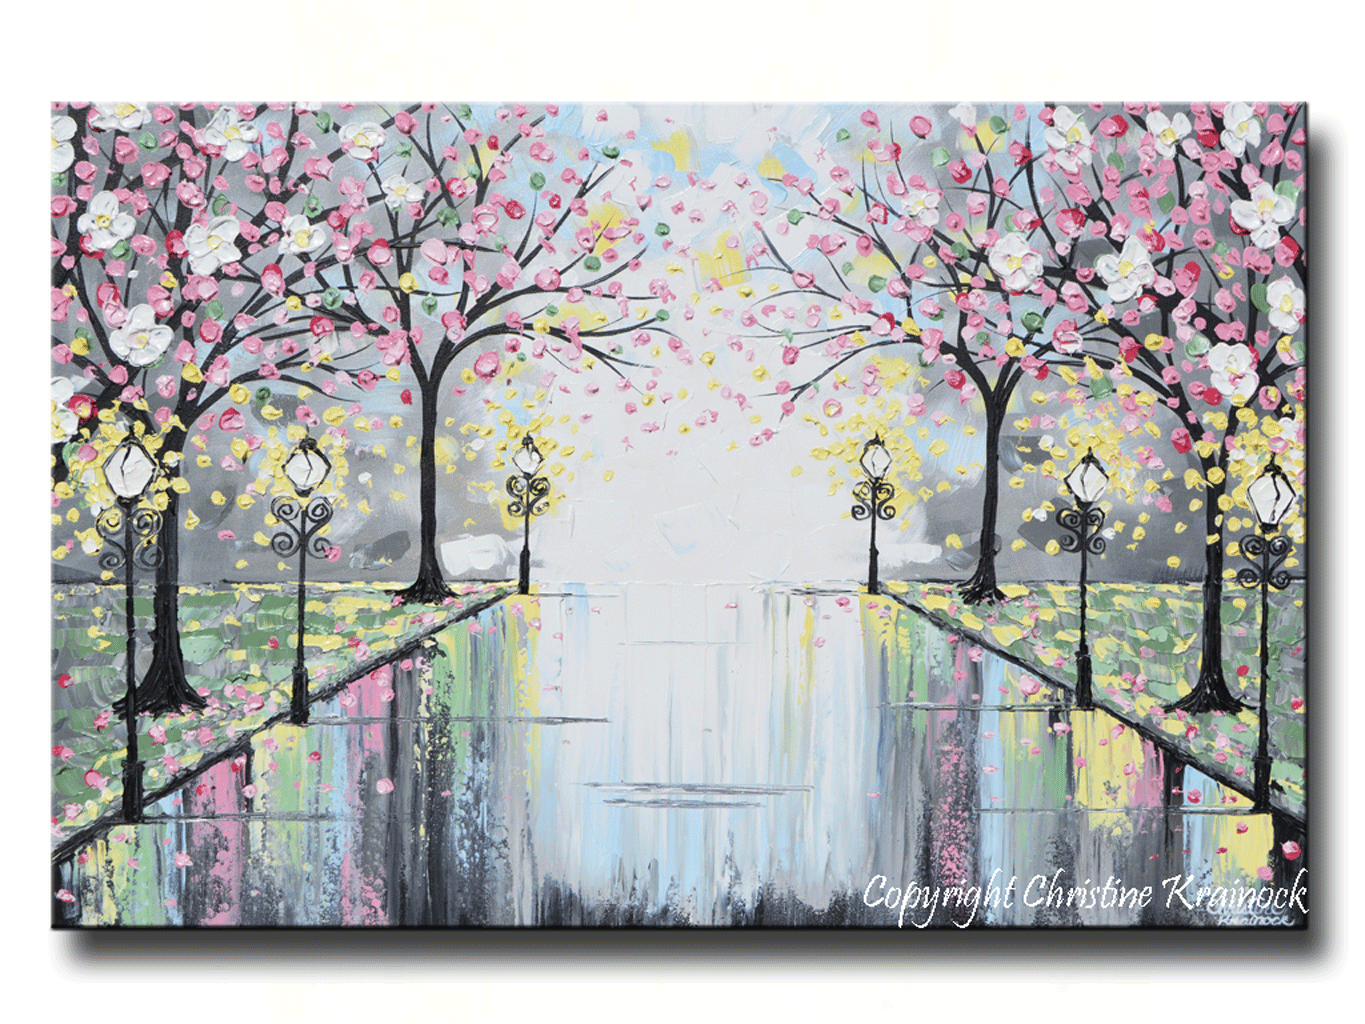 GICLEE PRINT Art Abstract Painting Pink Blossoming Cherry Trees Park Flowers Canvas Prints Grey Decor - Christine Krainock Art - Contemporary Art by Christine - 1